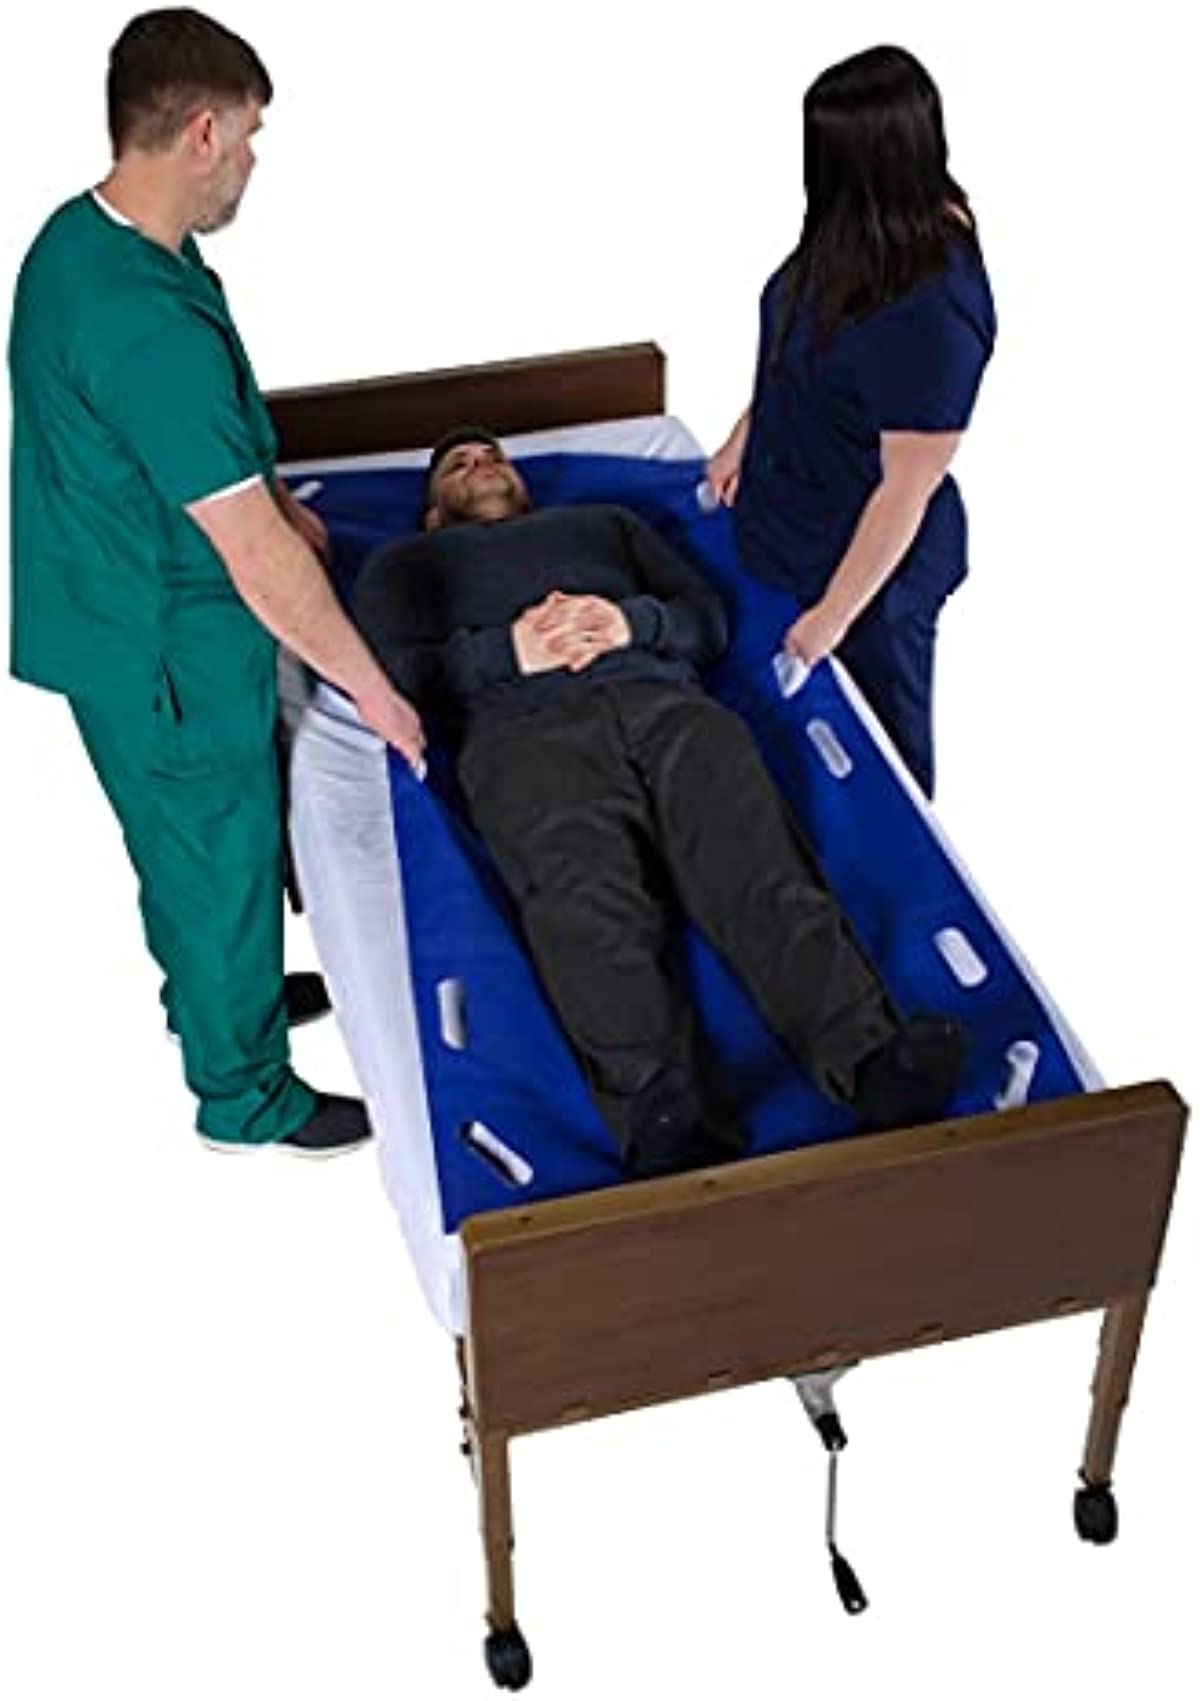 Patient Aid 75\" x 33\" SPU Patient Transfer Sheet with Hand Grips (5 Pack) - Disposable, Single Patient Use - for Moving, Handling, Repositioning - Use in Hospital, Home, EMS, Ambulance